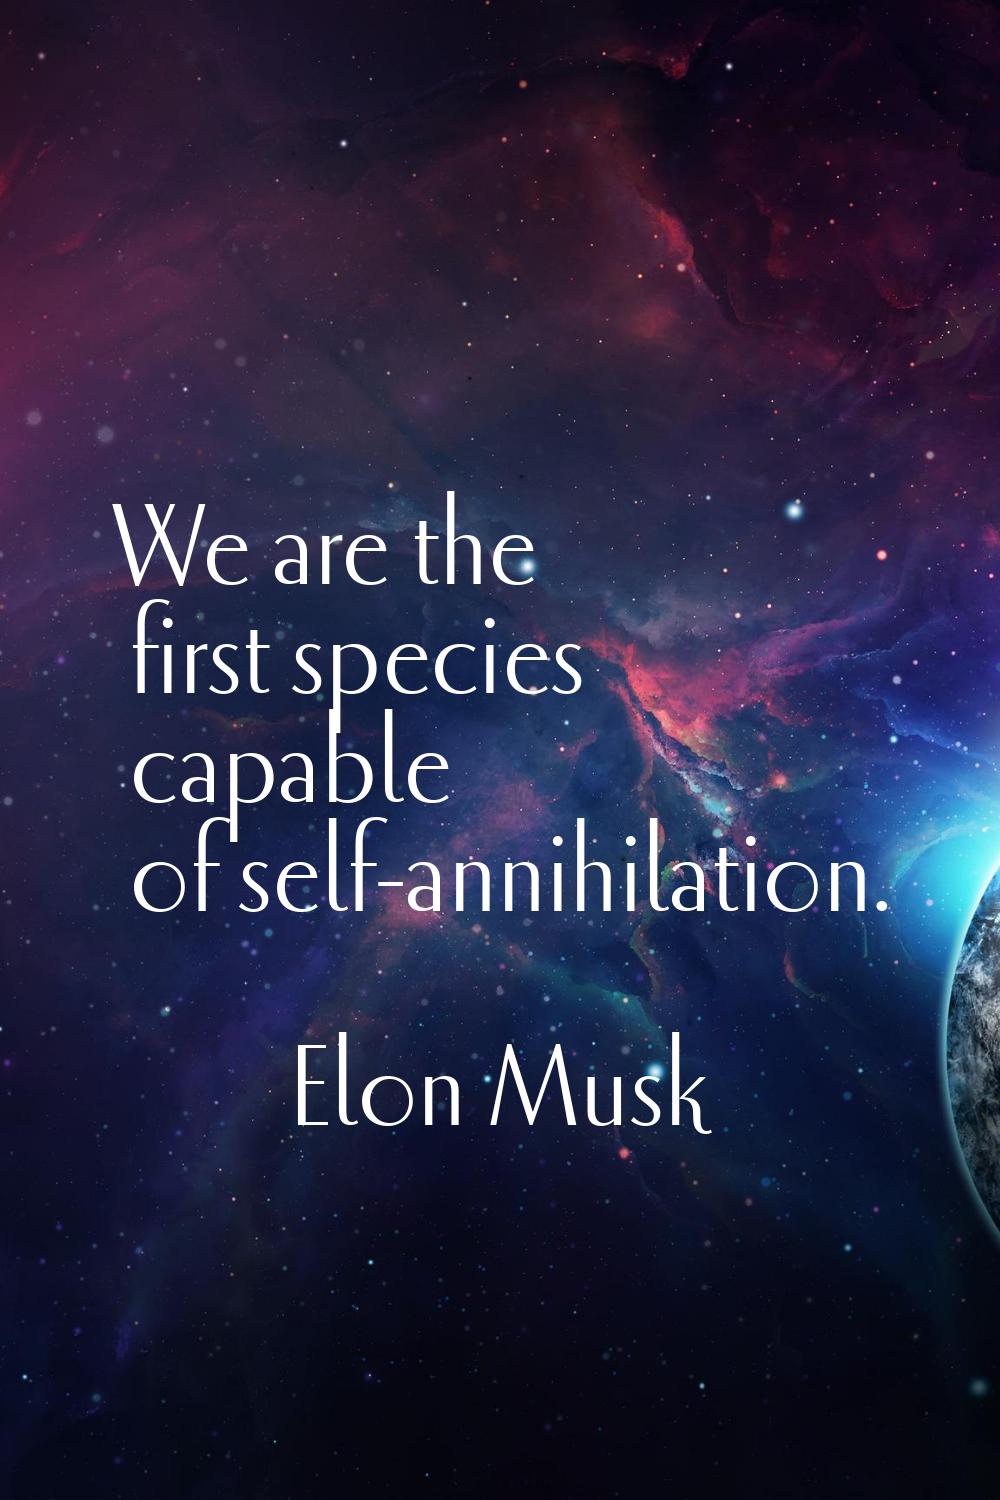 We are the first species capable of self-annihilation.